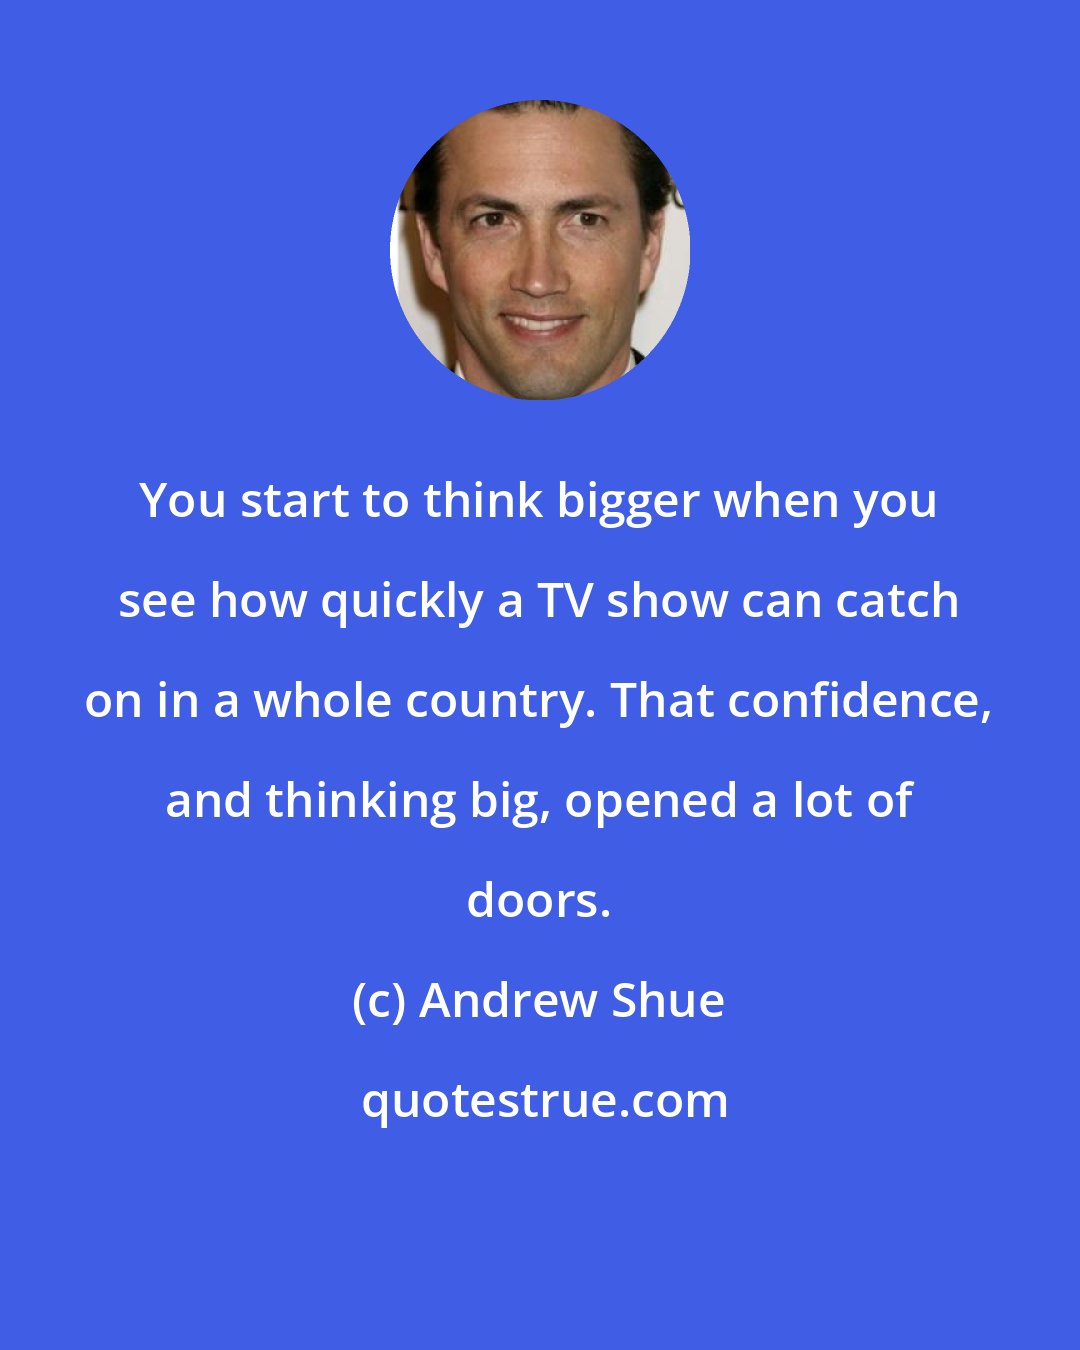 Andrew Shue: You start to think bigger when you see how quickly a TV show can catch on in a whole country. That confidence, and thinking big, opened a lot of doors.